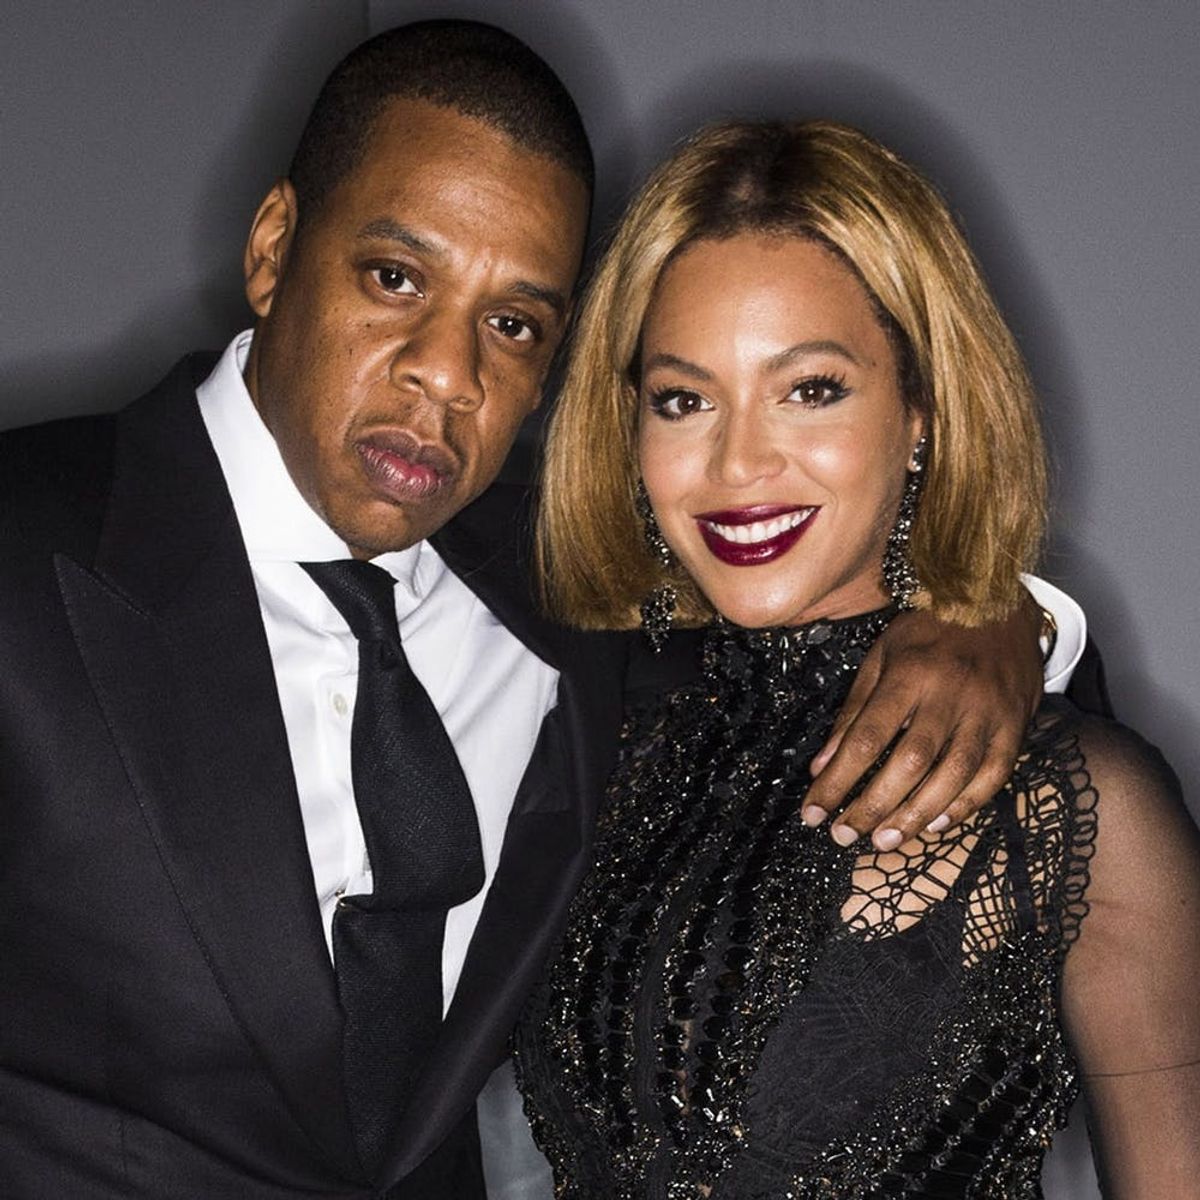 See the Epic First Video from Beyoncé and JAY-Z’s Surprise Joint Album